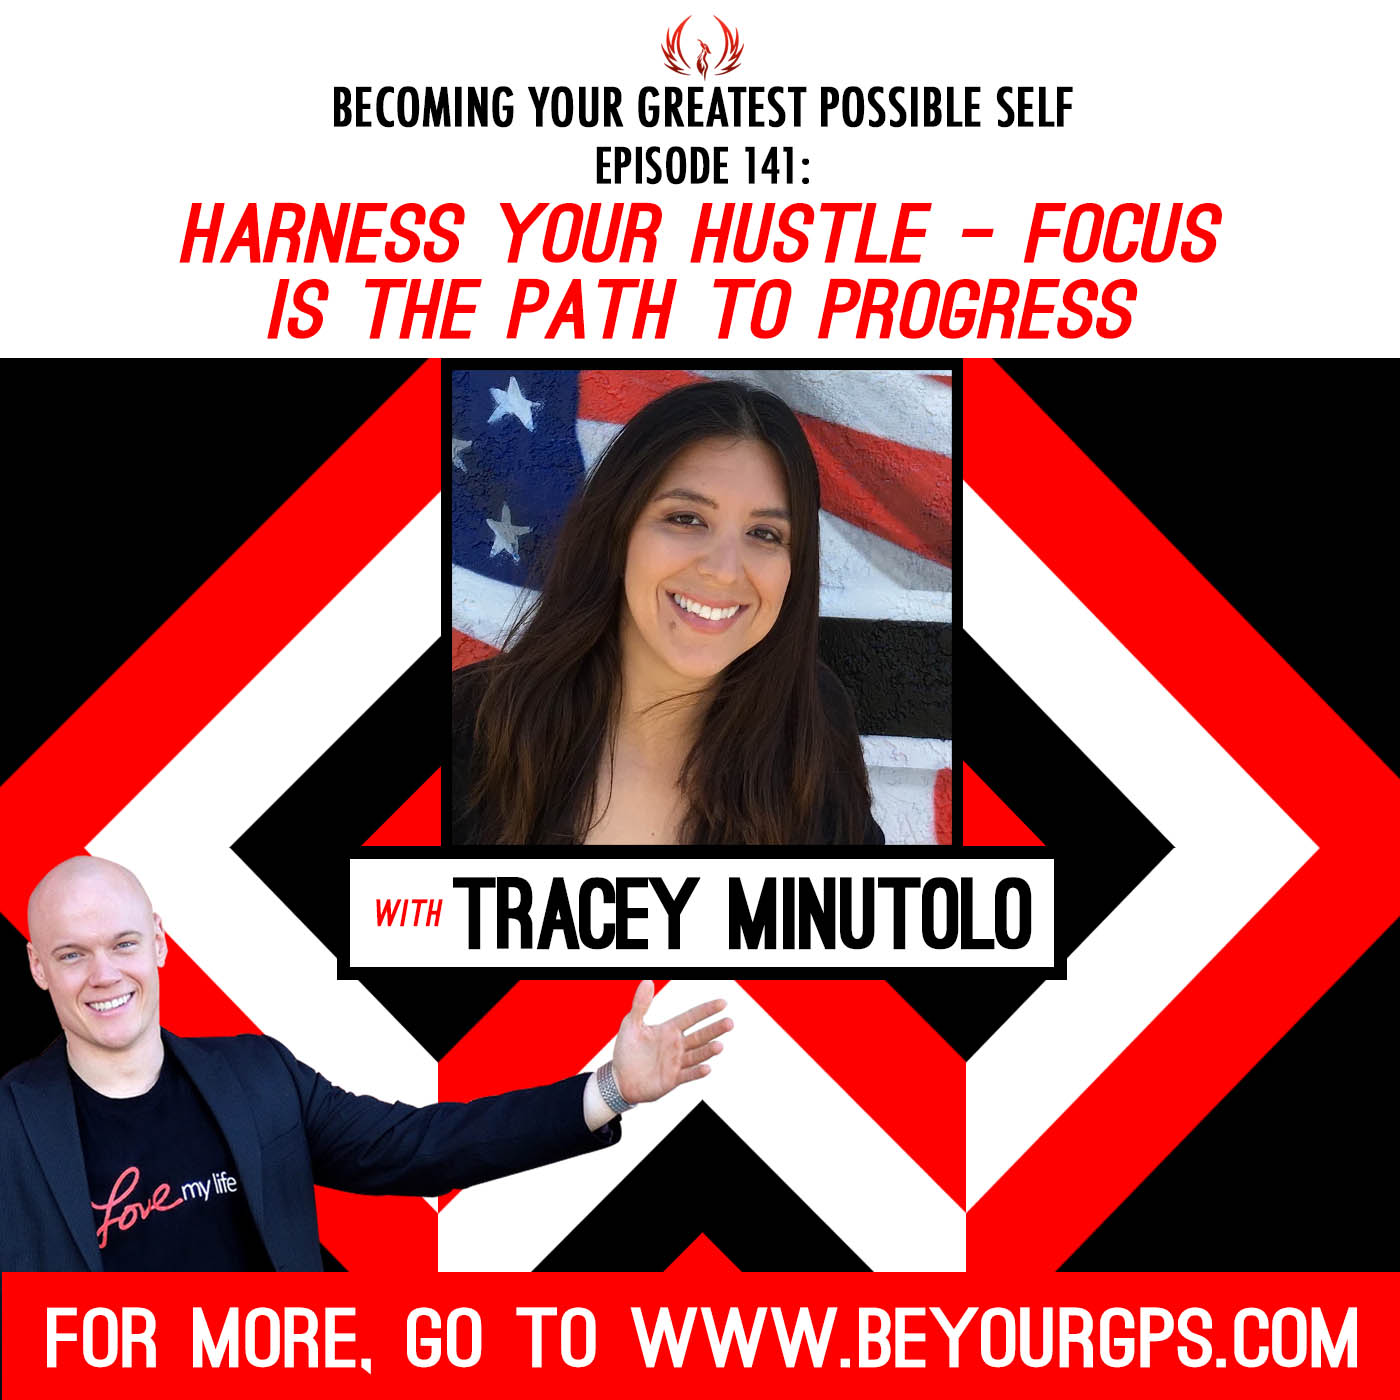 Harness Your Hustle - Focus is the Path to Progress with Tracey Minutolo